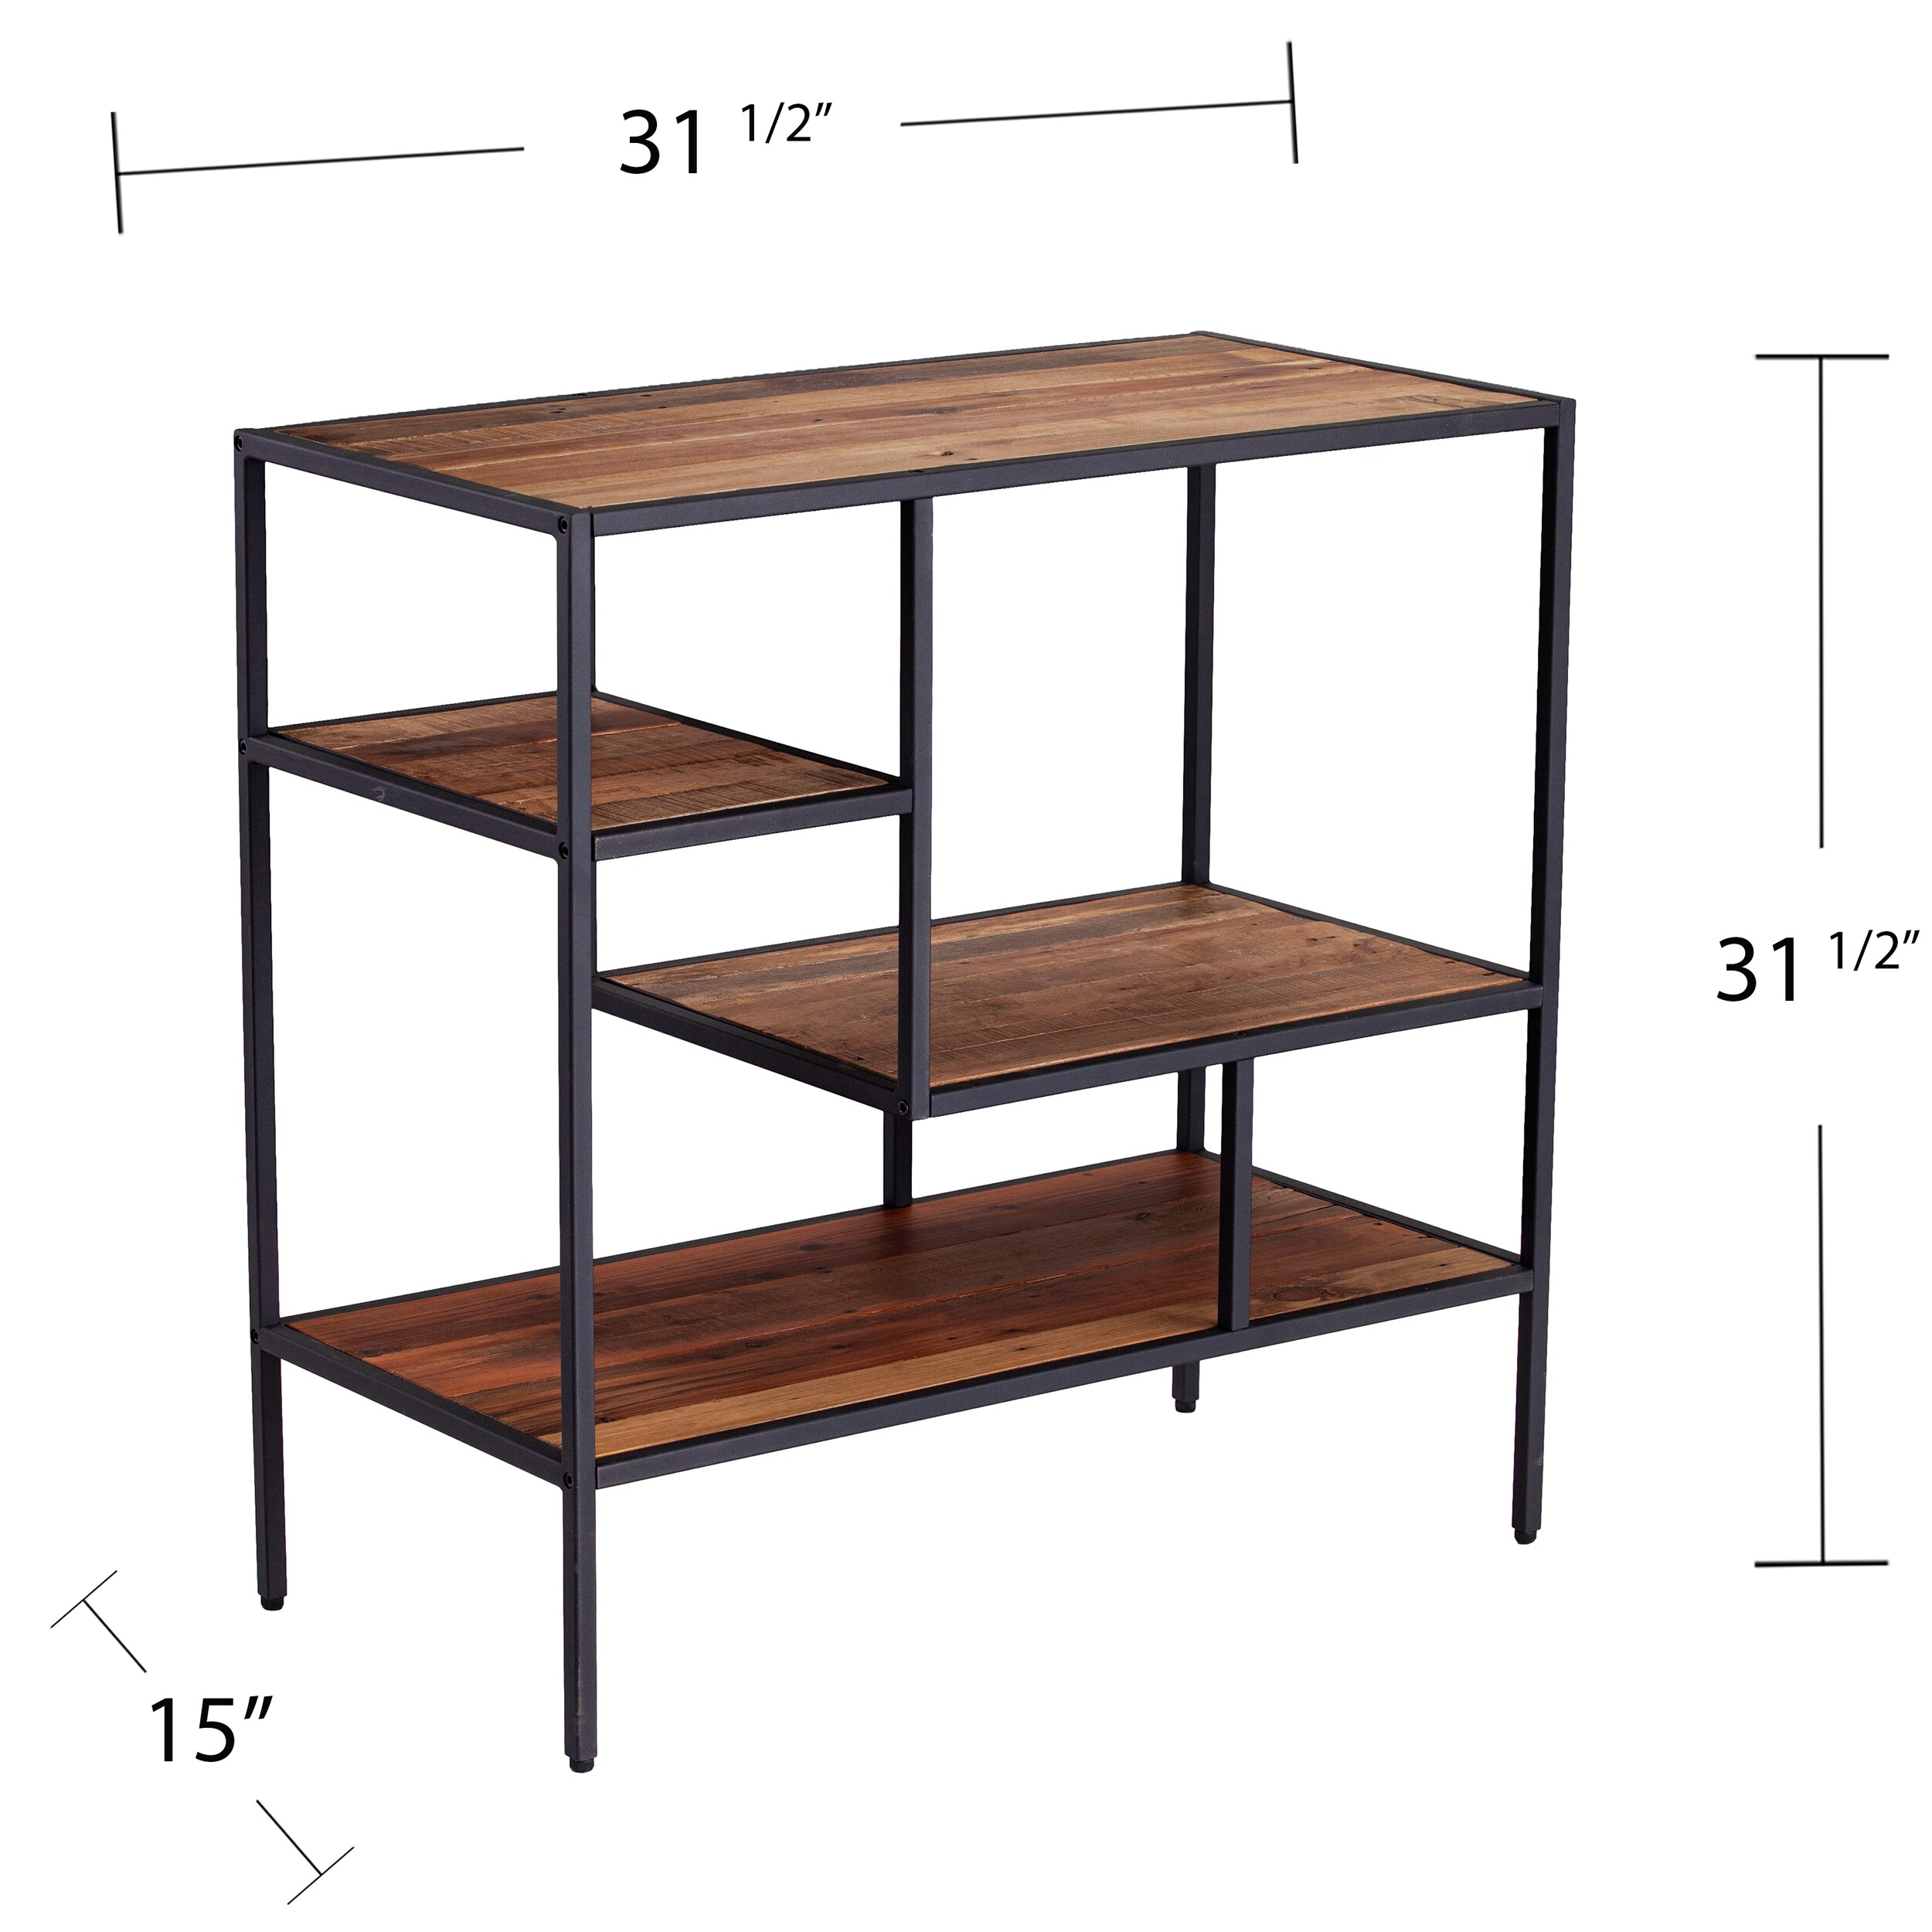 New 27"H x 24"W Solid Glass 2-Tier Shelves Industrial Rustic Style Bookcase Rack 